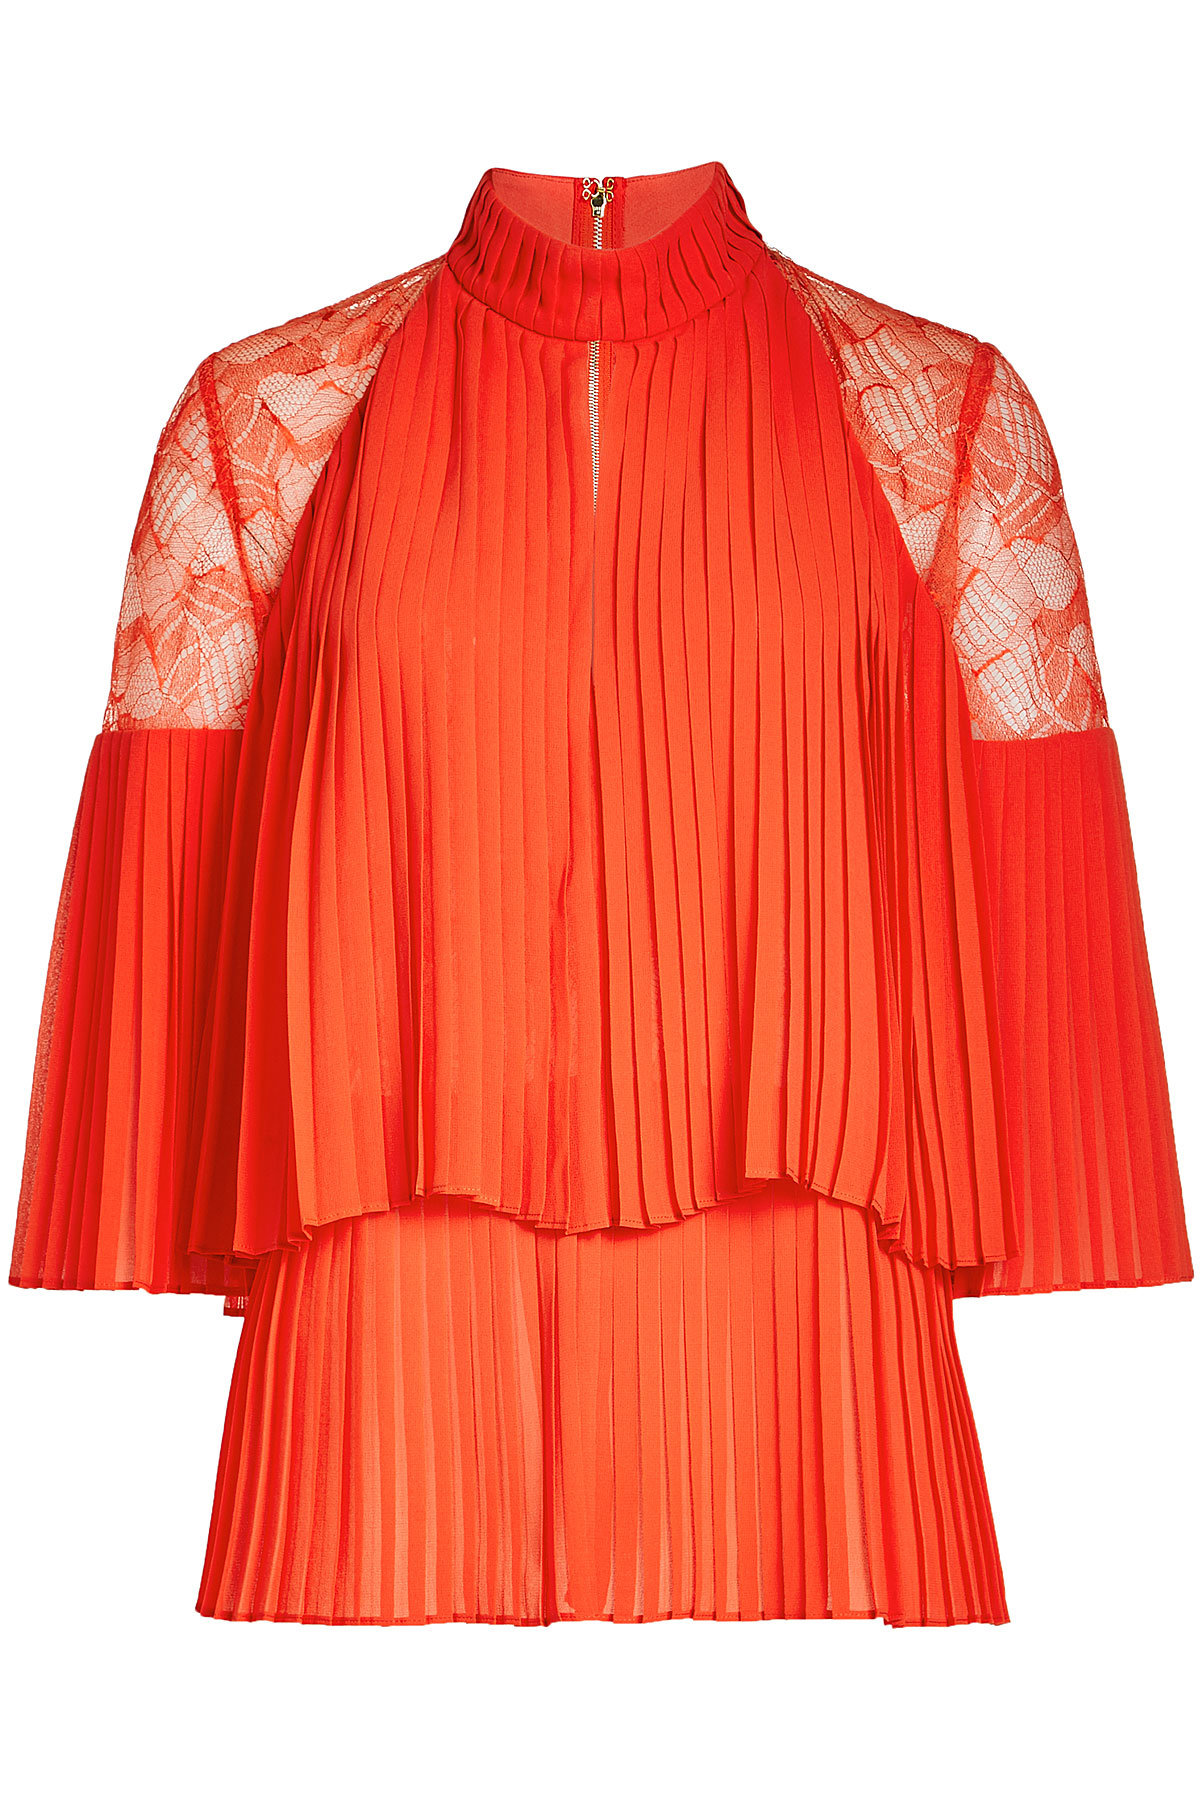 Elie Saab - Pleated Top with Lace